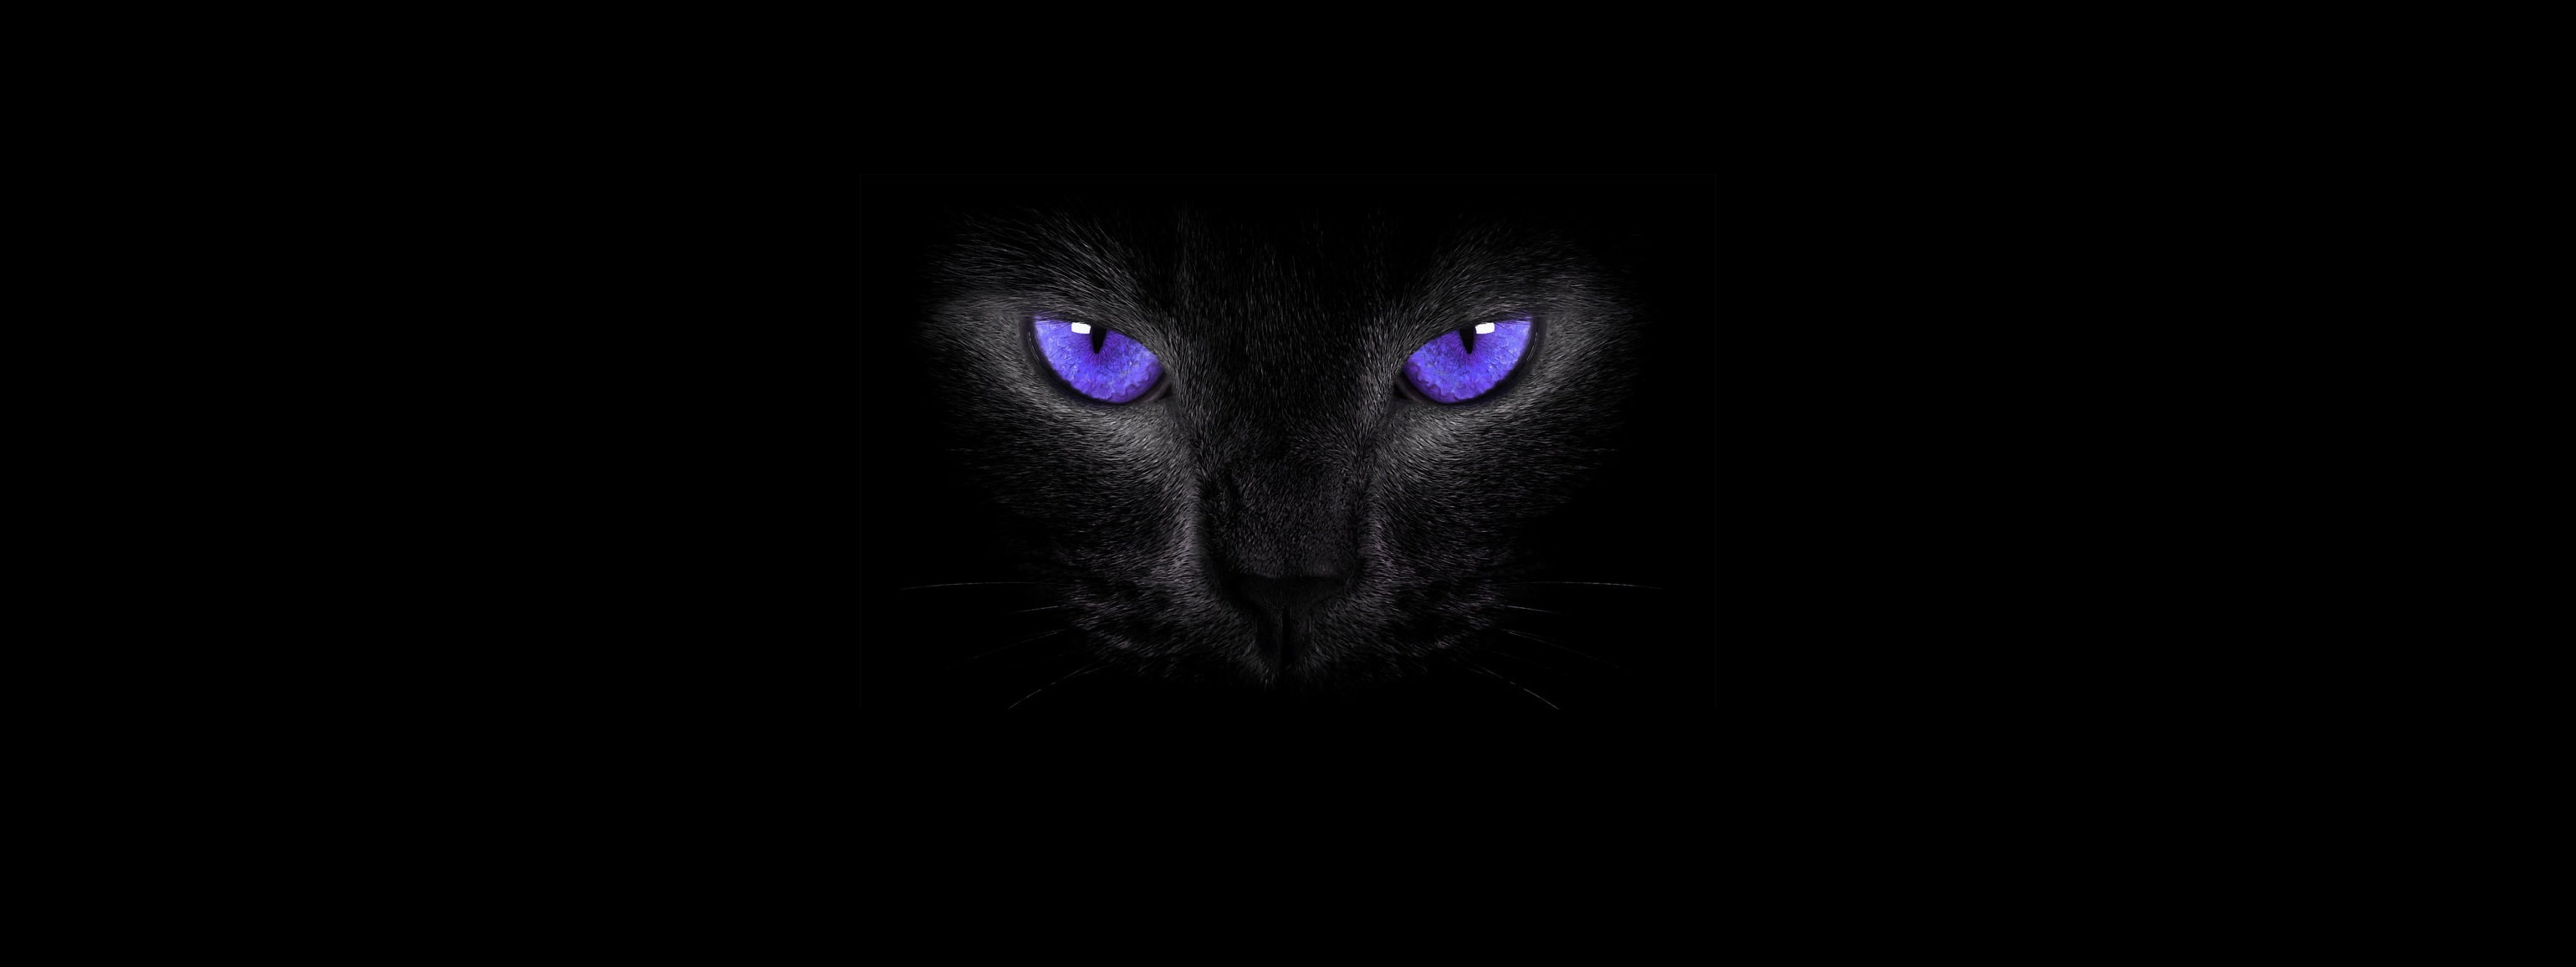 Black Cats, cat eyes, Simple Background, Smoky Eyes, domestic cat